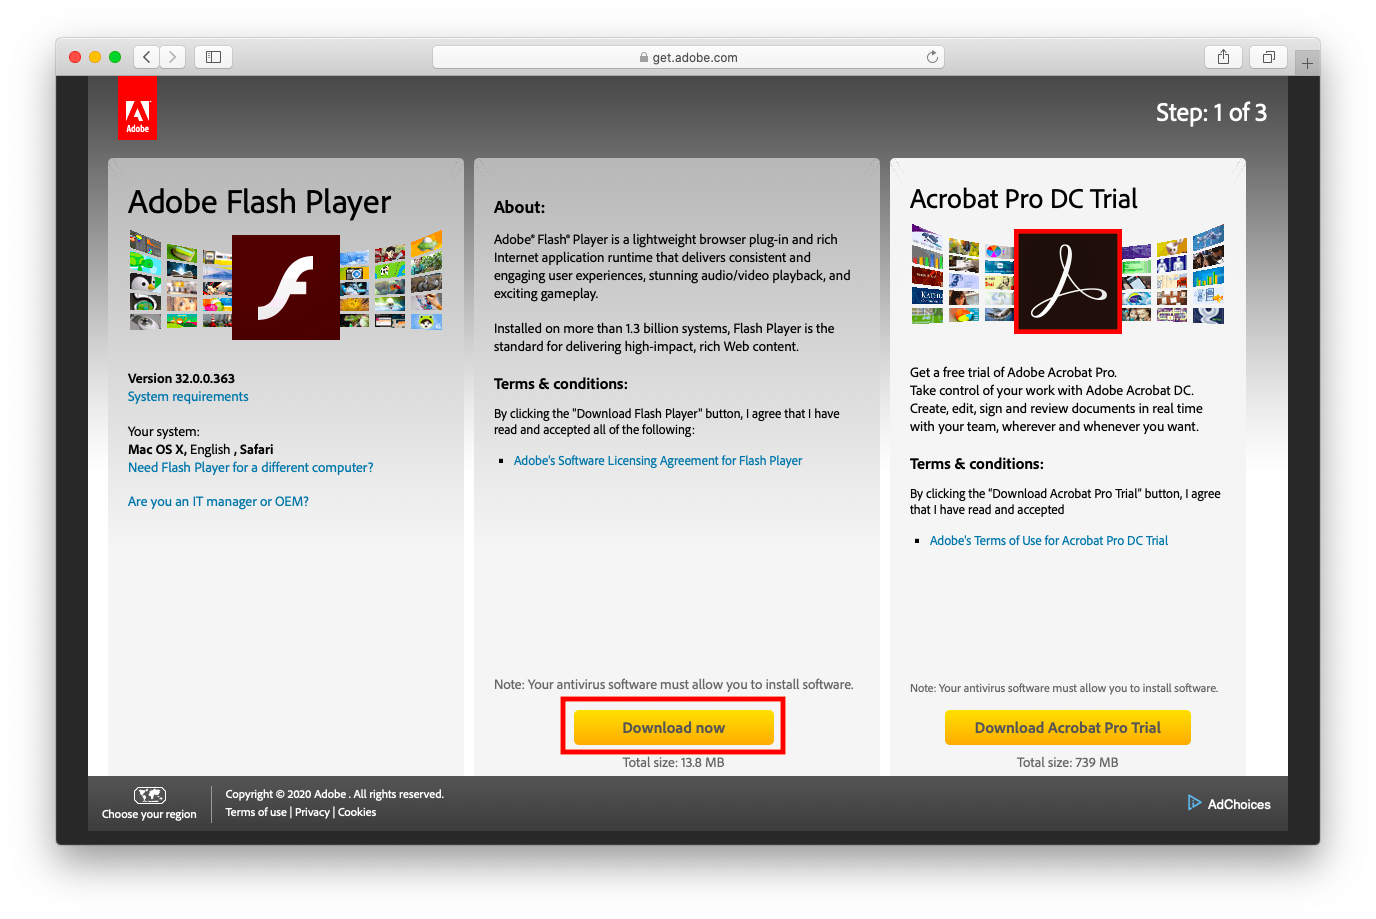 Adobe Flash Player 18.0.0.194 Now Available for Download